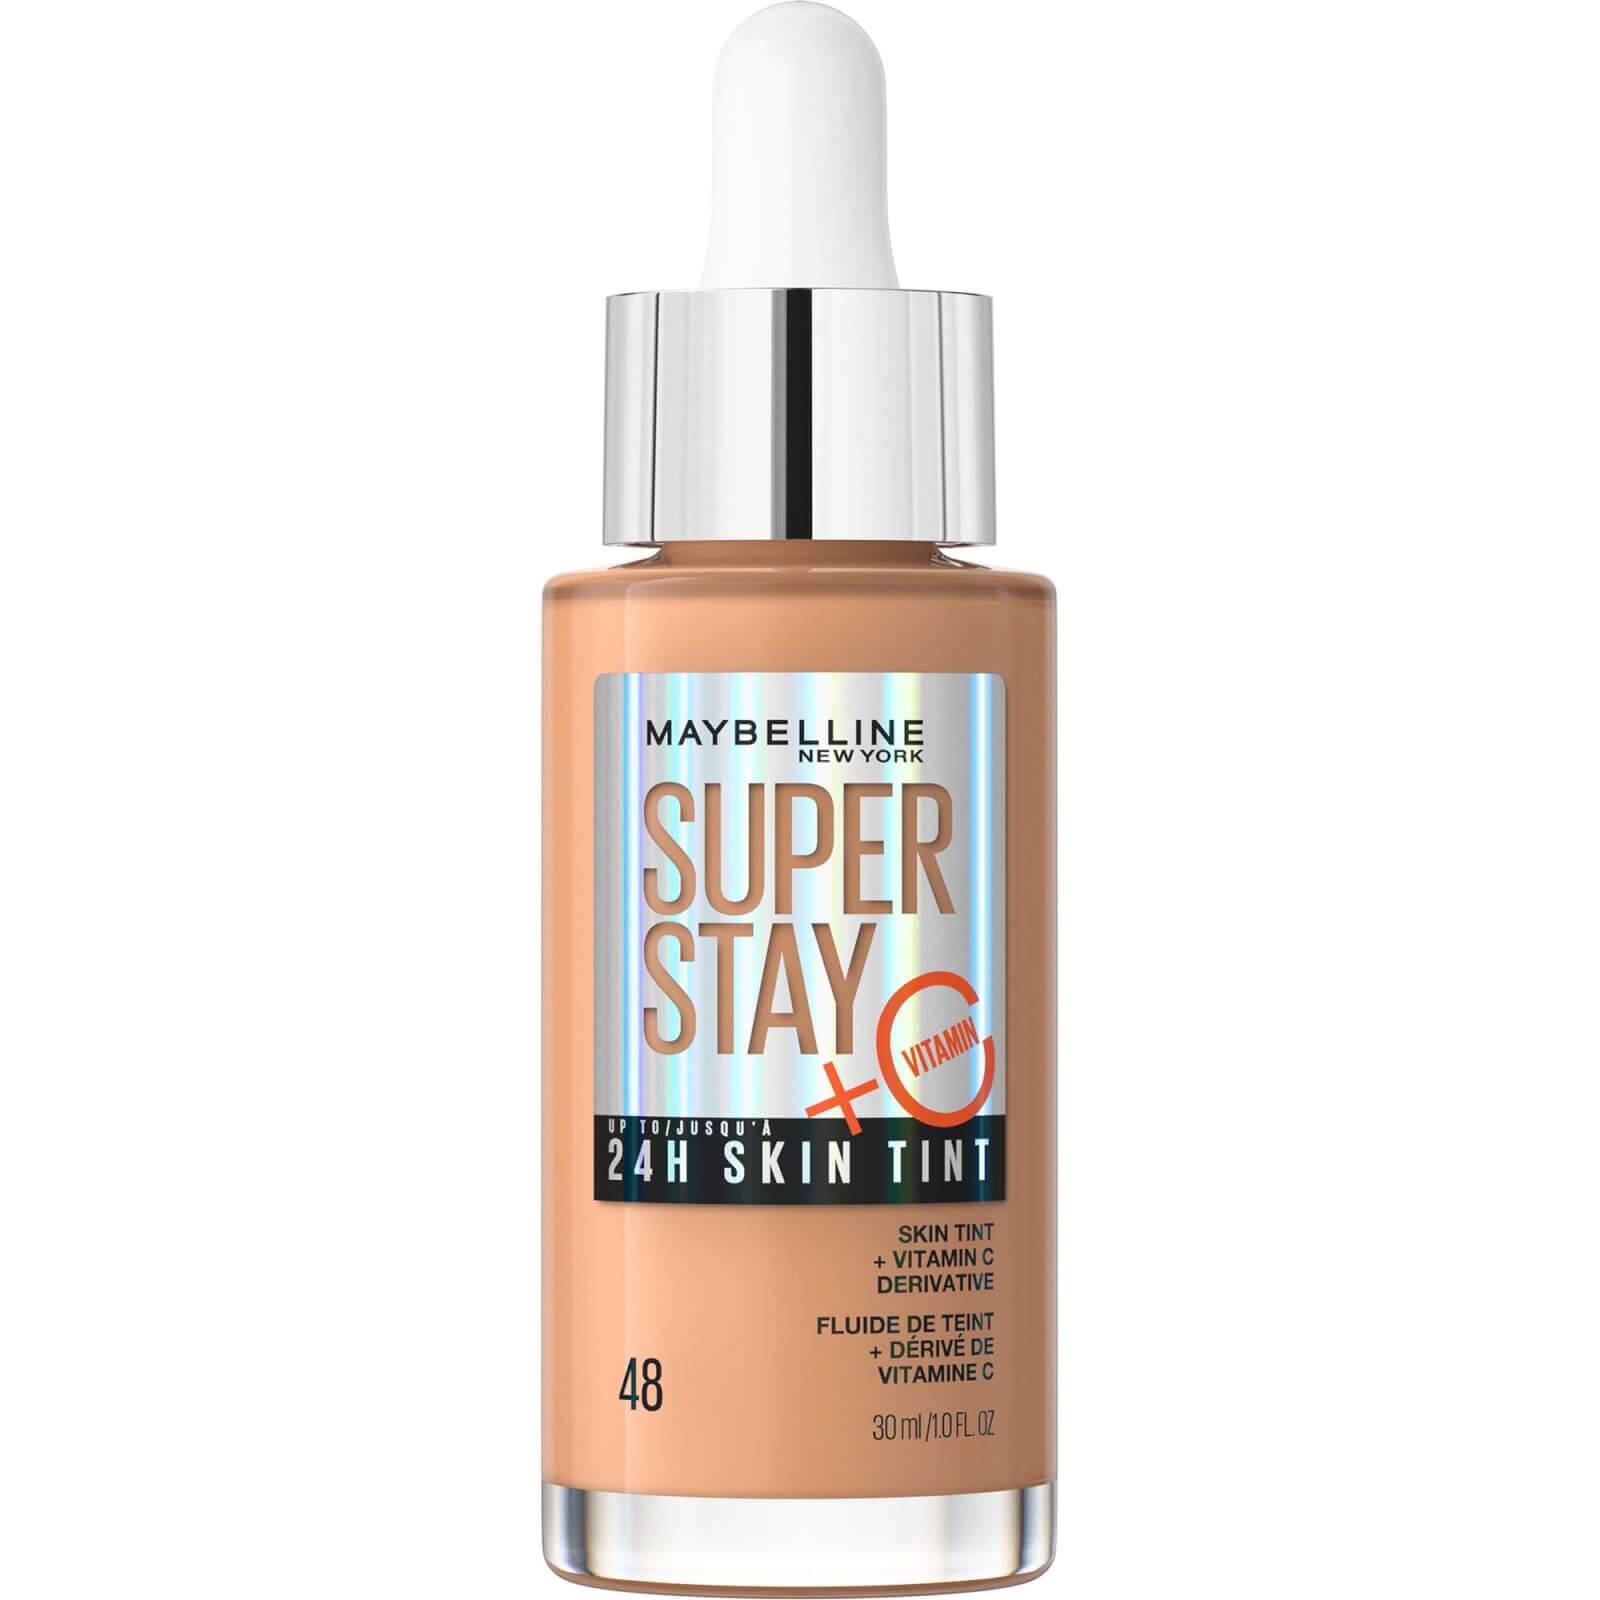 Maybelline Super Stay Up To 24h Skin Tint Foundation + Vitamin C 30ml (various Shades) - 48 In Neutral